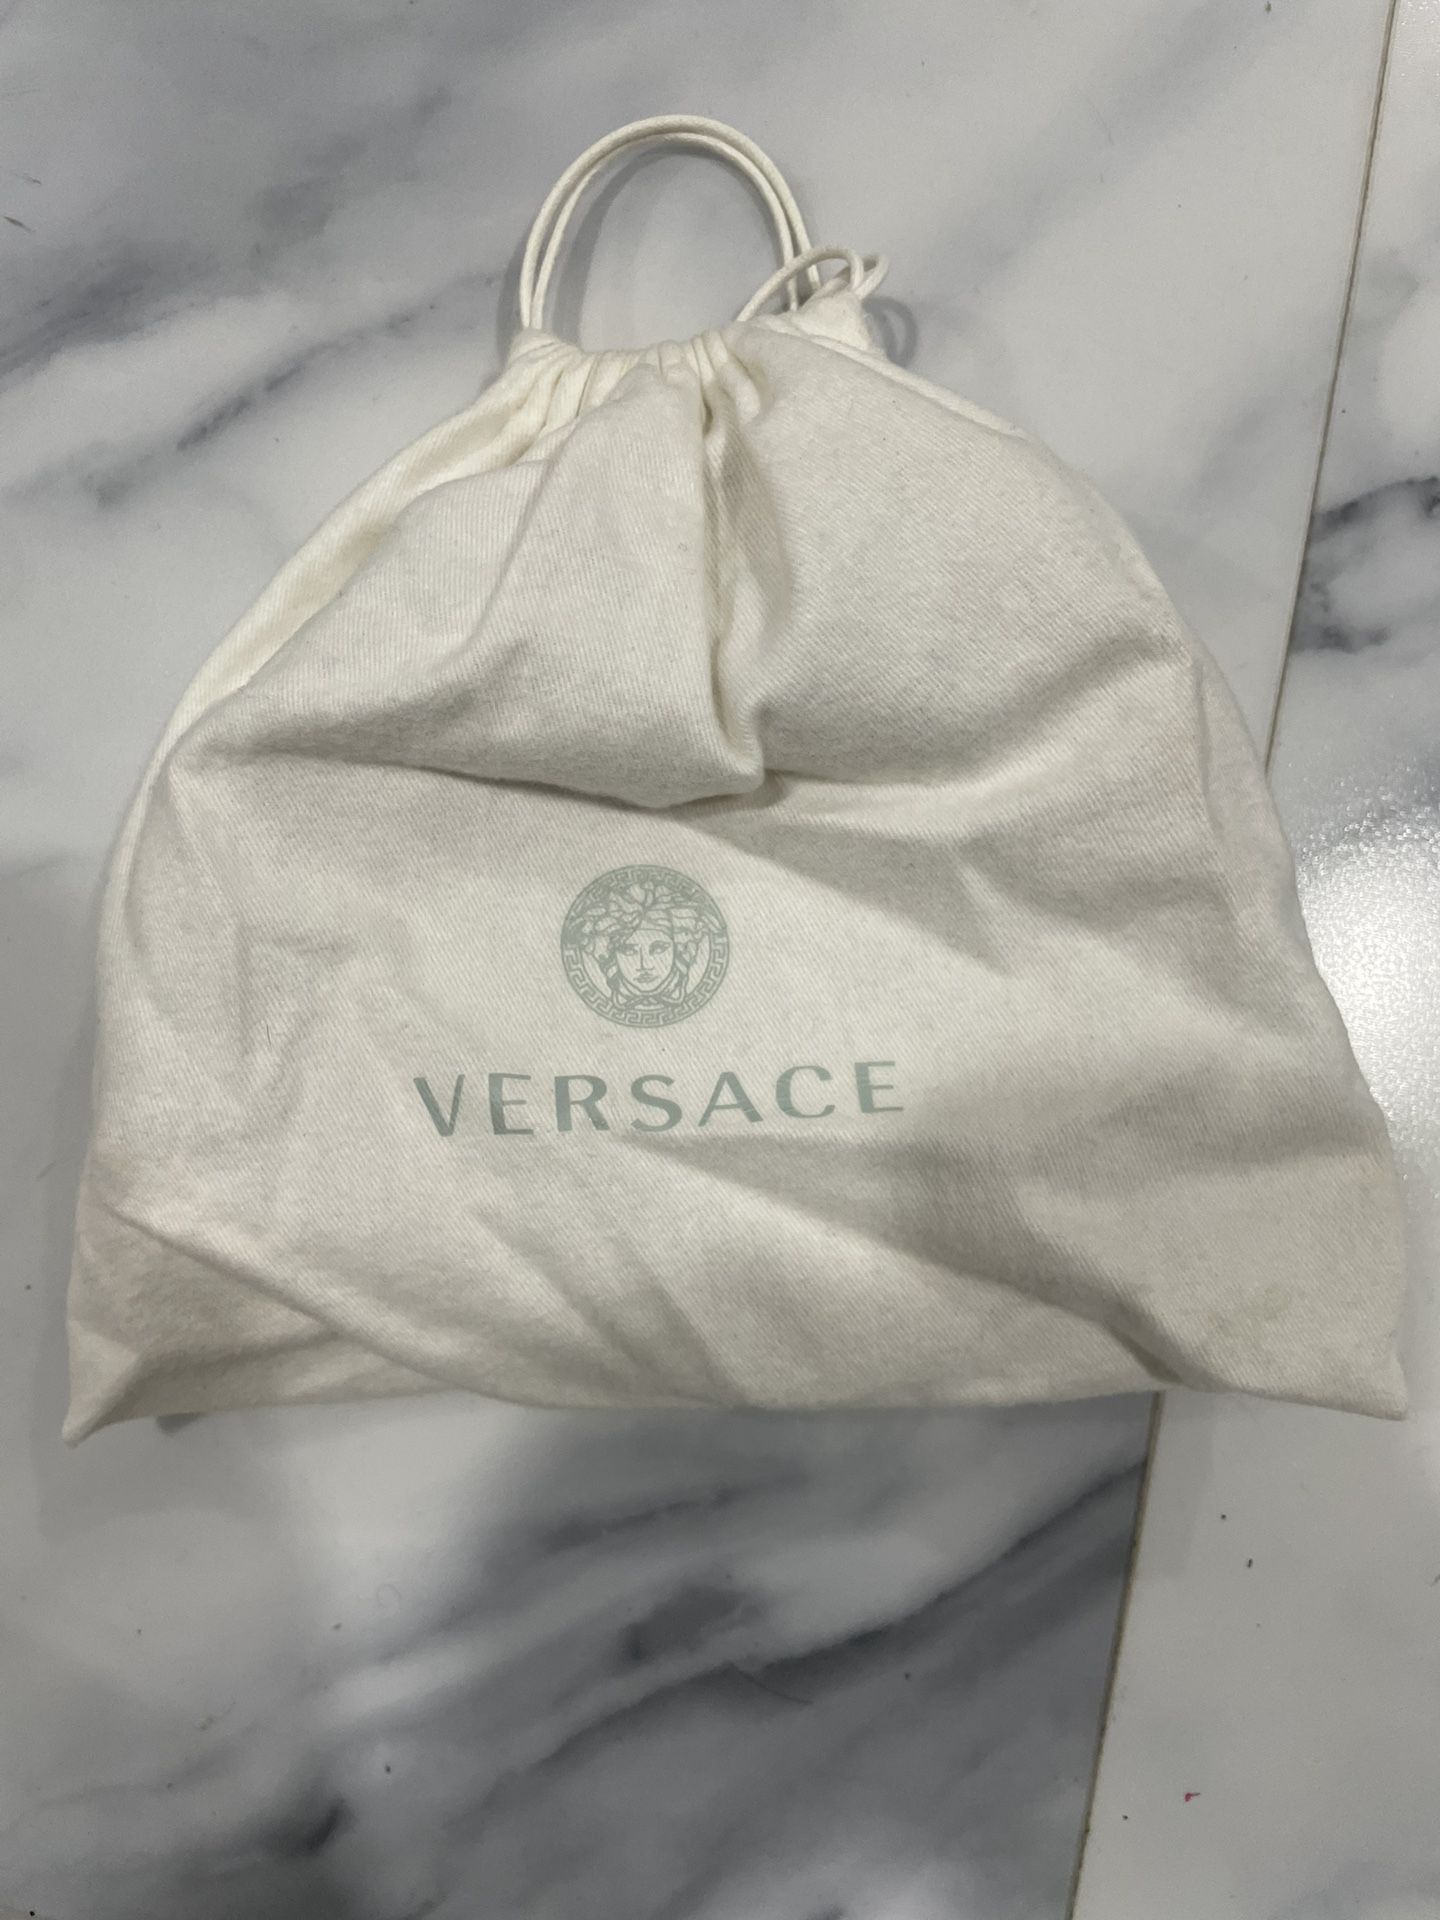 Good Condition Real Versace While And Gold Belt With Bag 